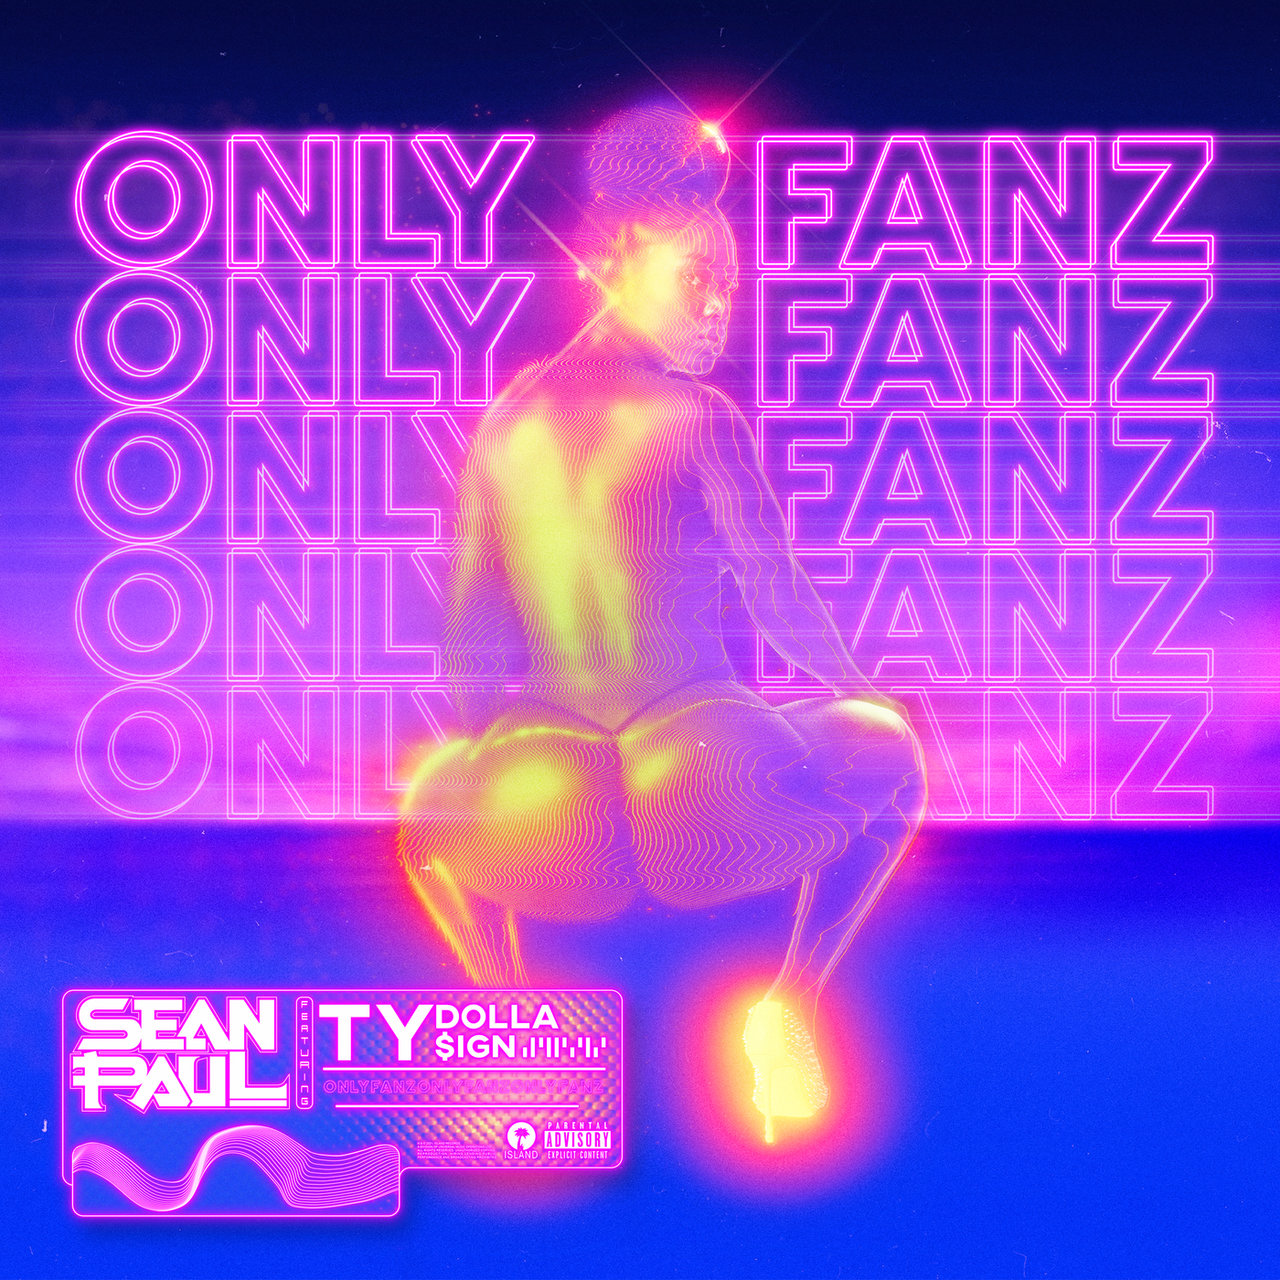 Sean Paul - Only Fanz (ft. Ty Dolla Sign) (Cover)